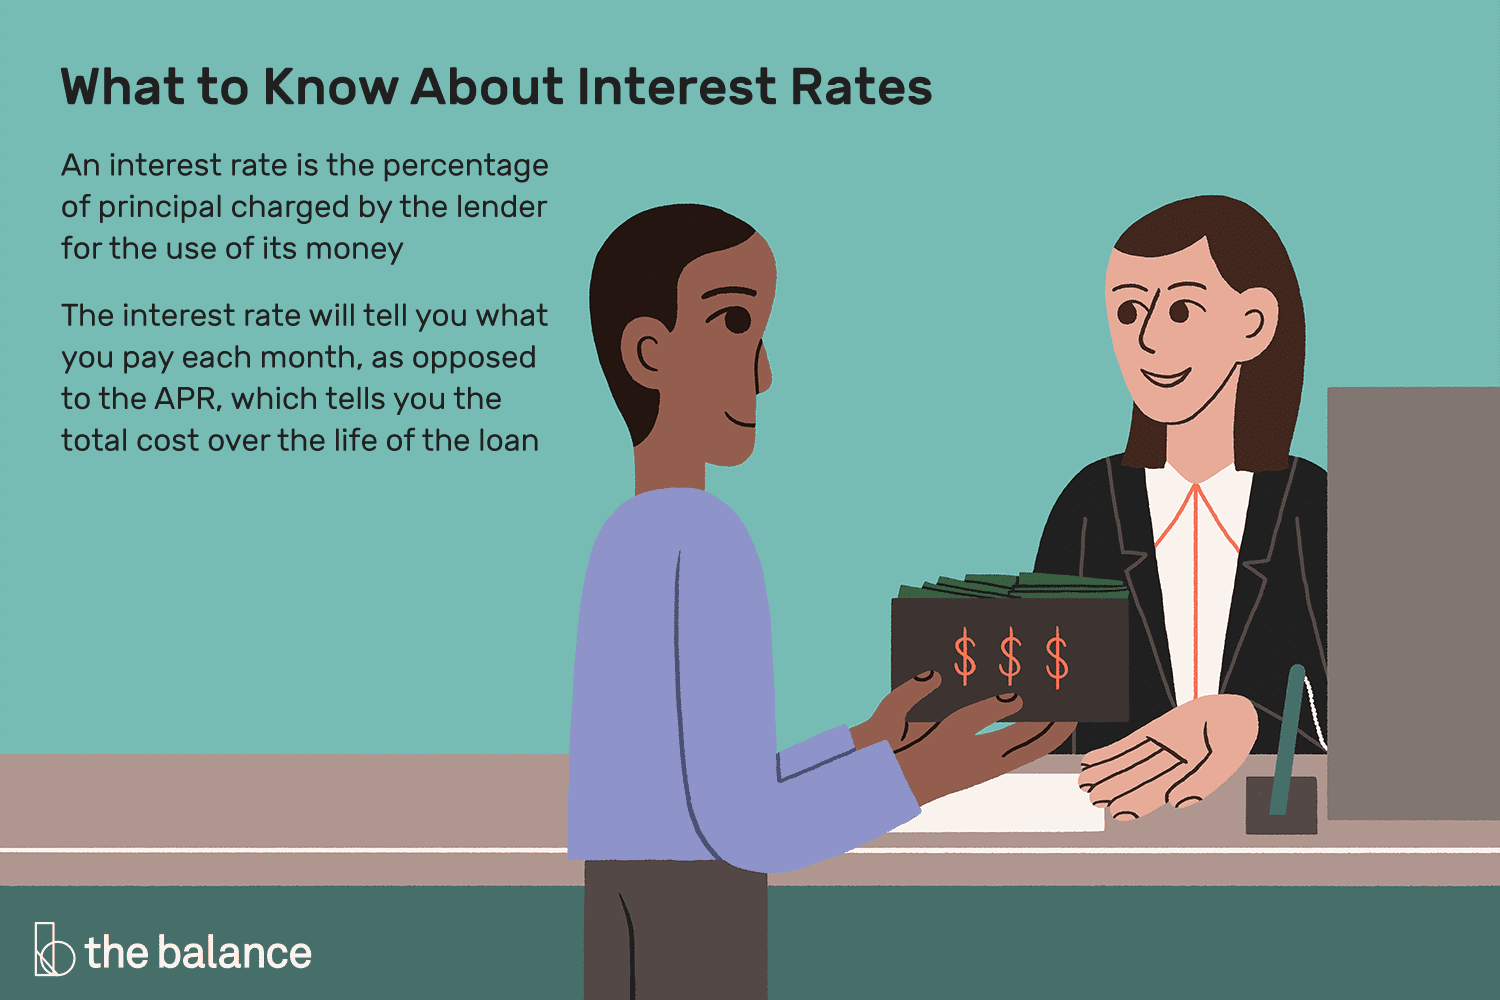 Illustration of a person at the counter of a bank handing a wallet full of money to a bank teller. Headline reads: “What to Know About Interest Rates” and text is “An interest rate is the percentage of principal charged by the lender for the use of its money. The interest rate will tell you what you pay each month, as opposed to the APR, which tells you the total cost over the life of the loan”